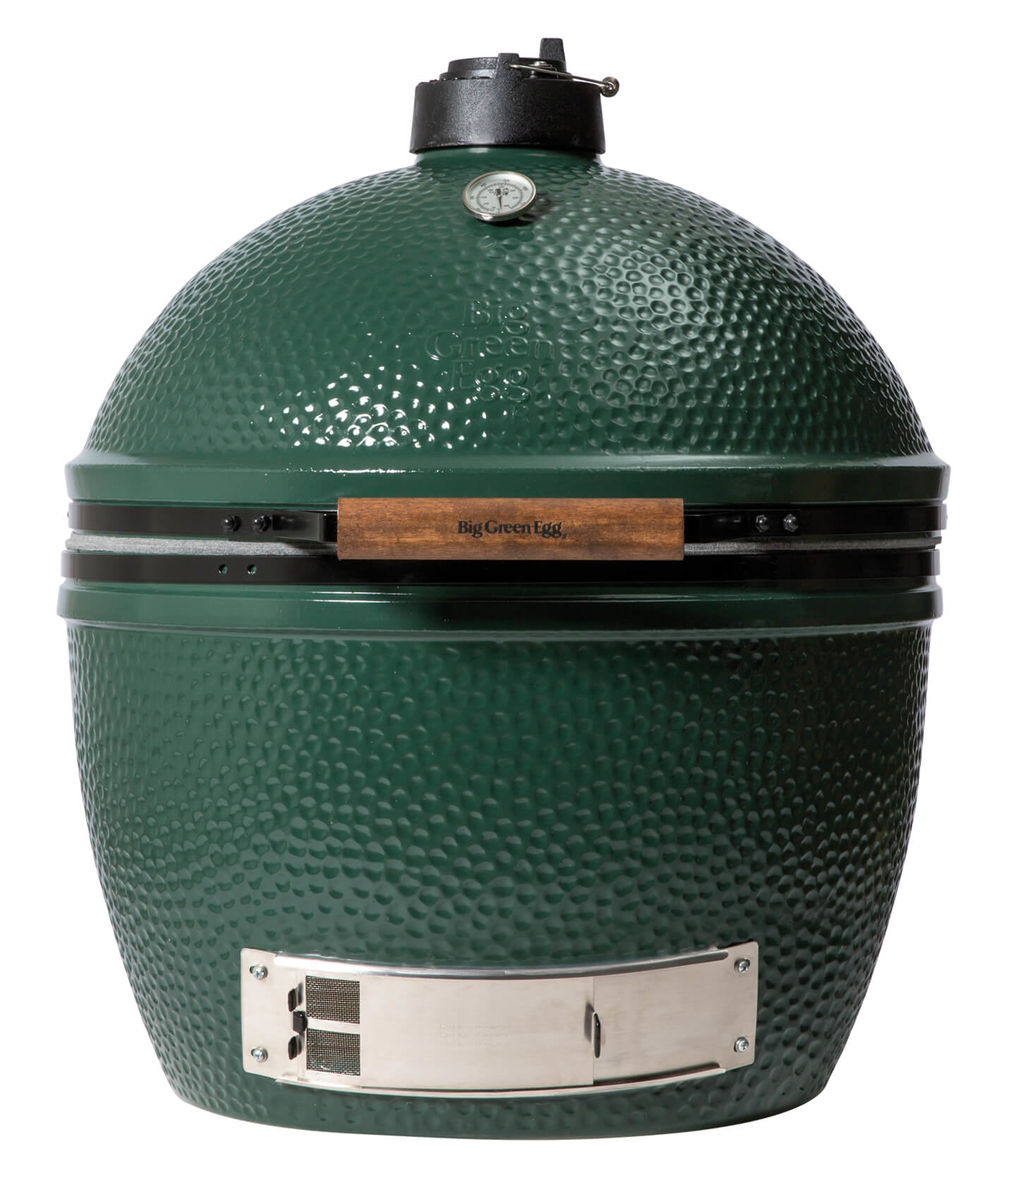 Image of Big Green Egg XLarge Grill bei nettoshop.ch